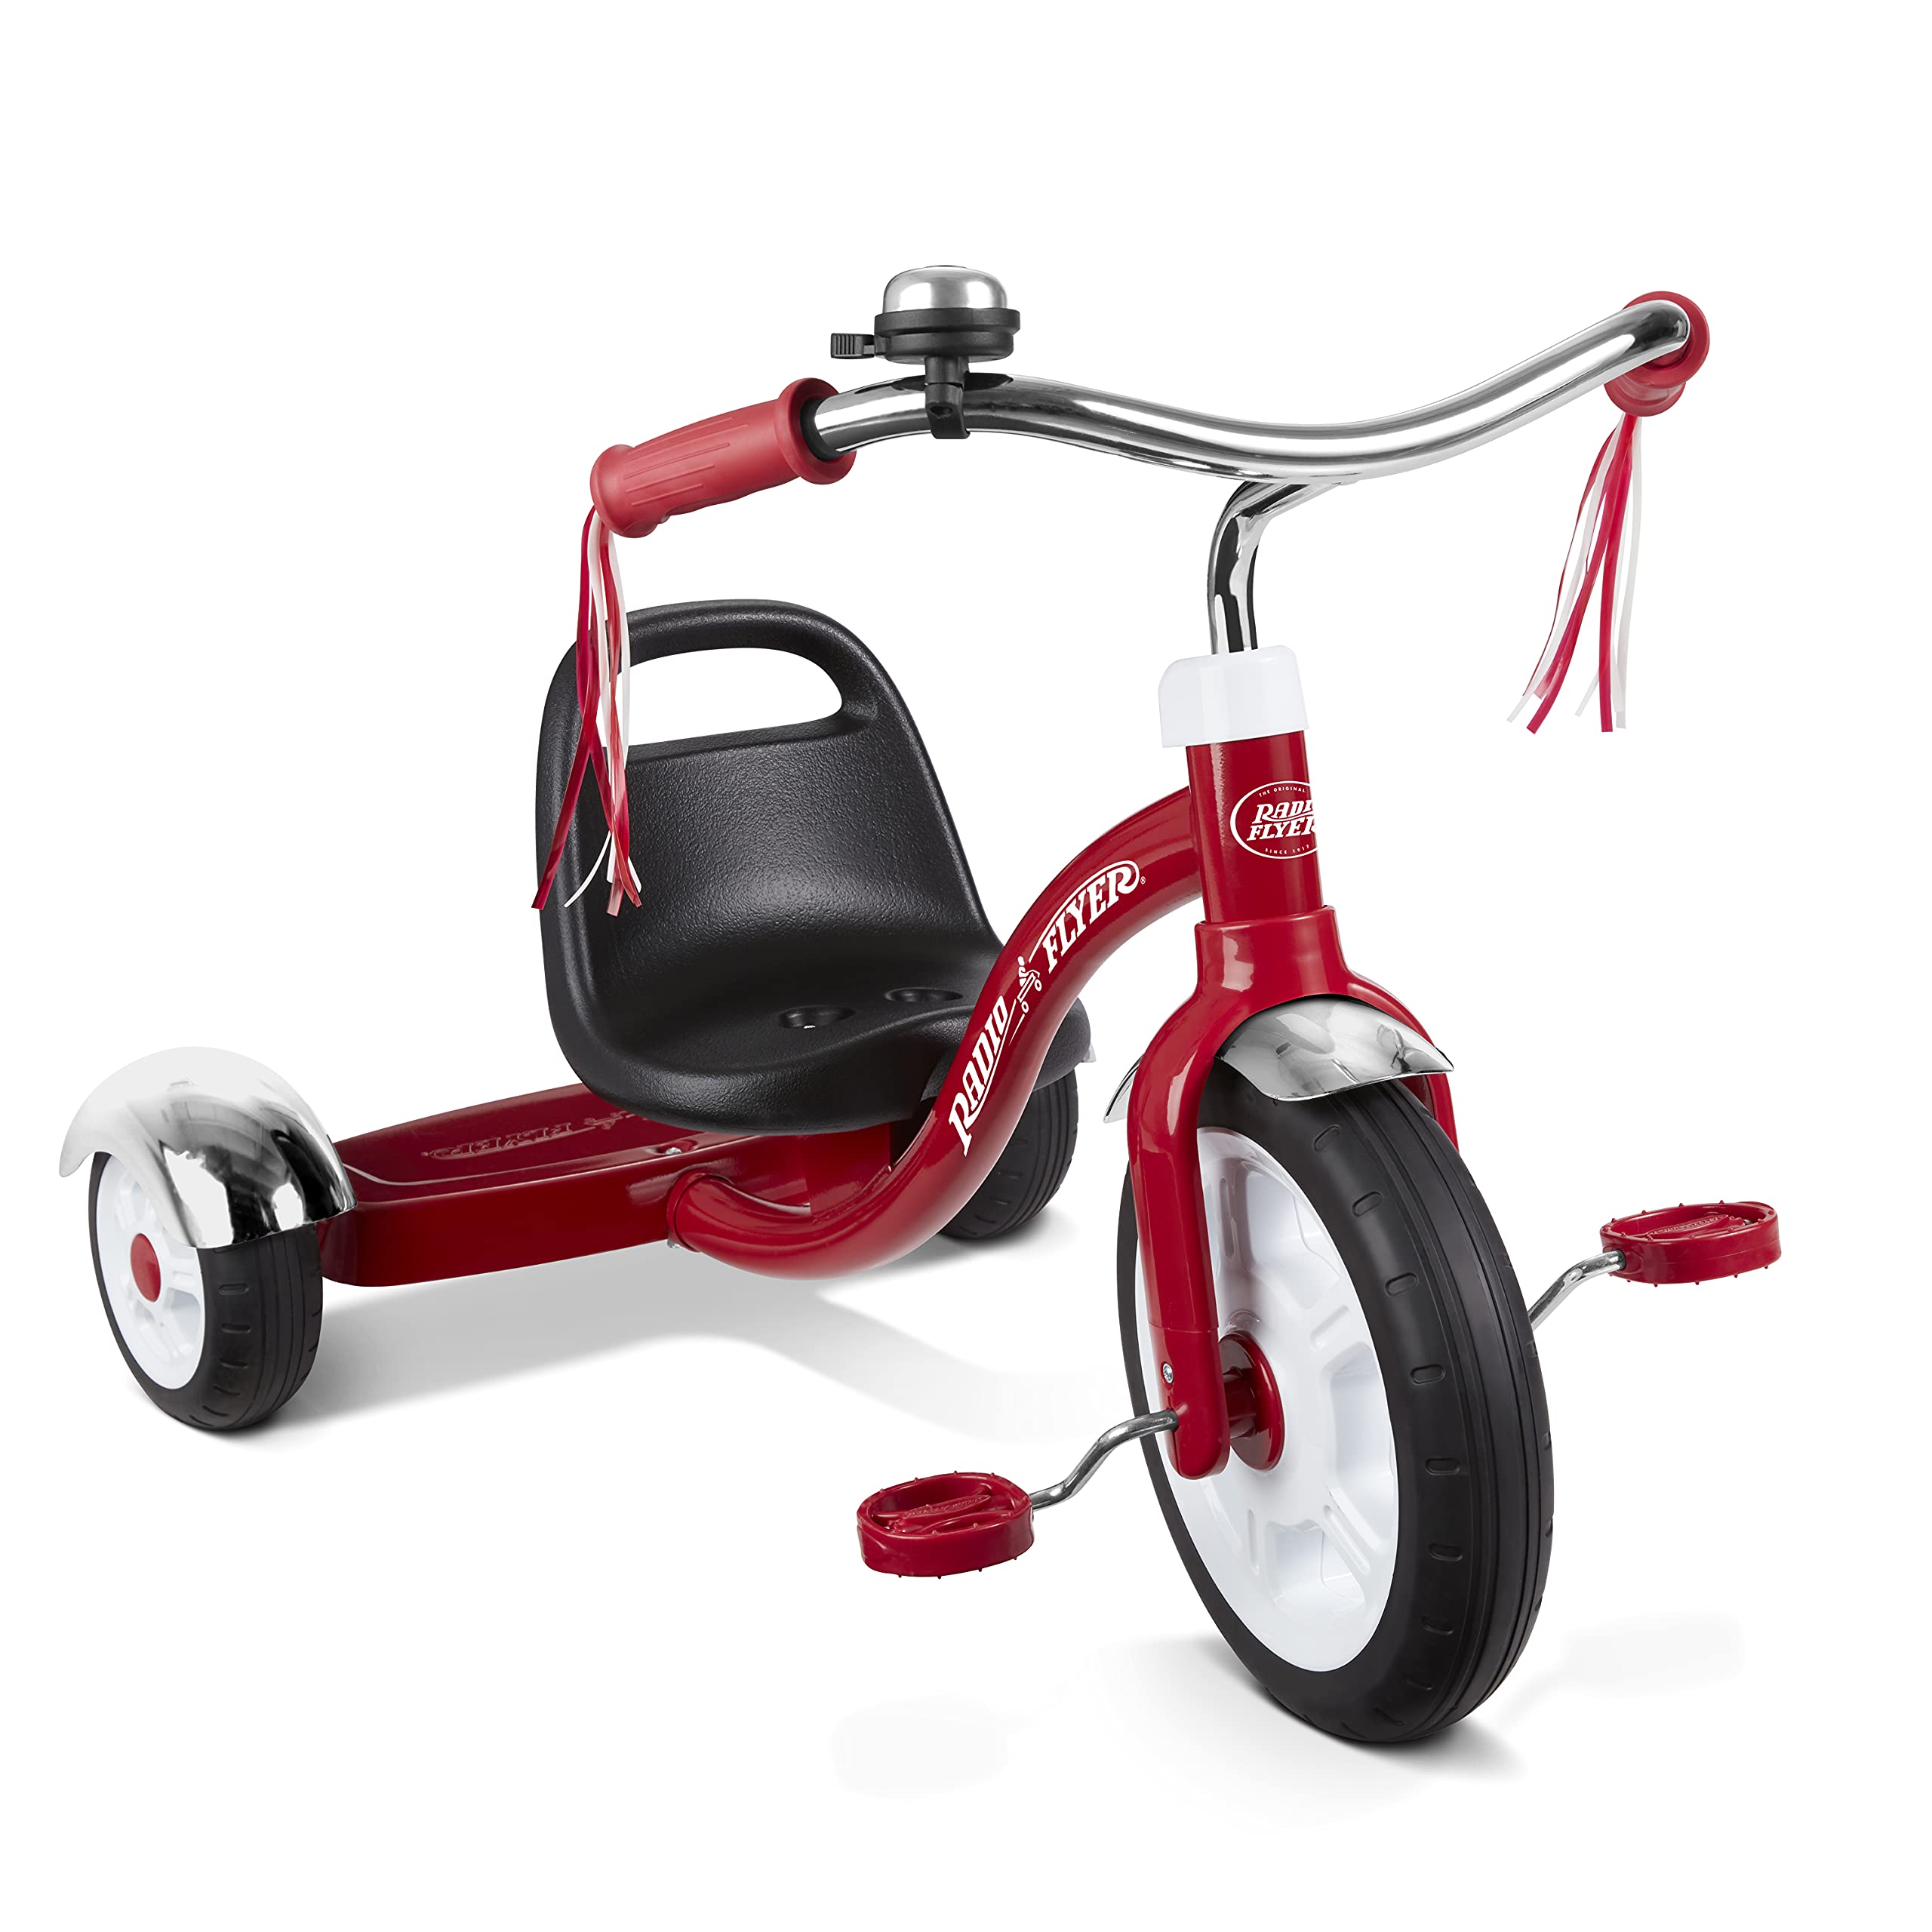 Radio Flyer Big Red Classic Tricycle